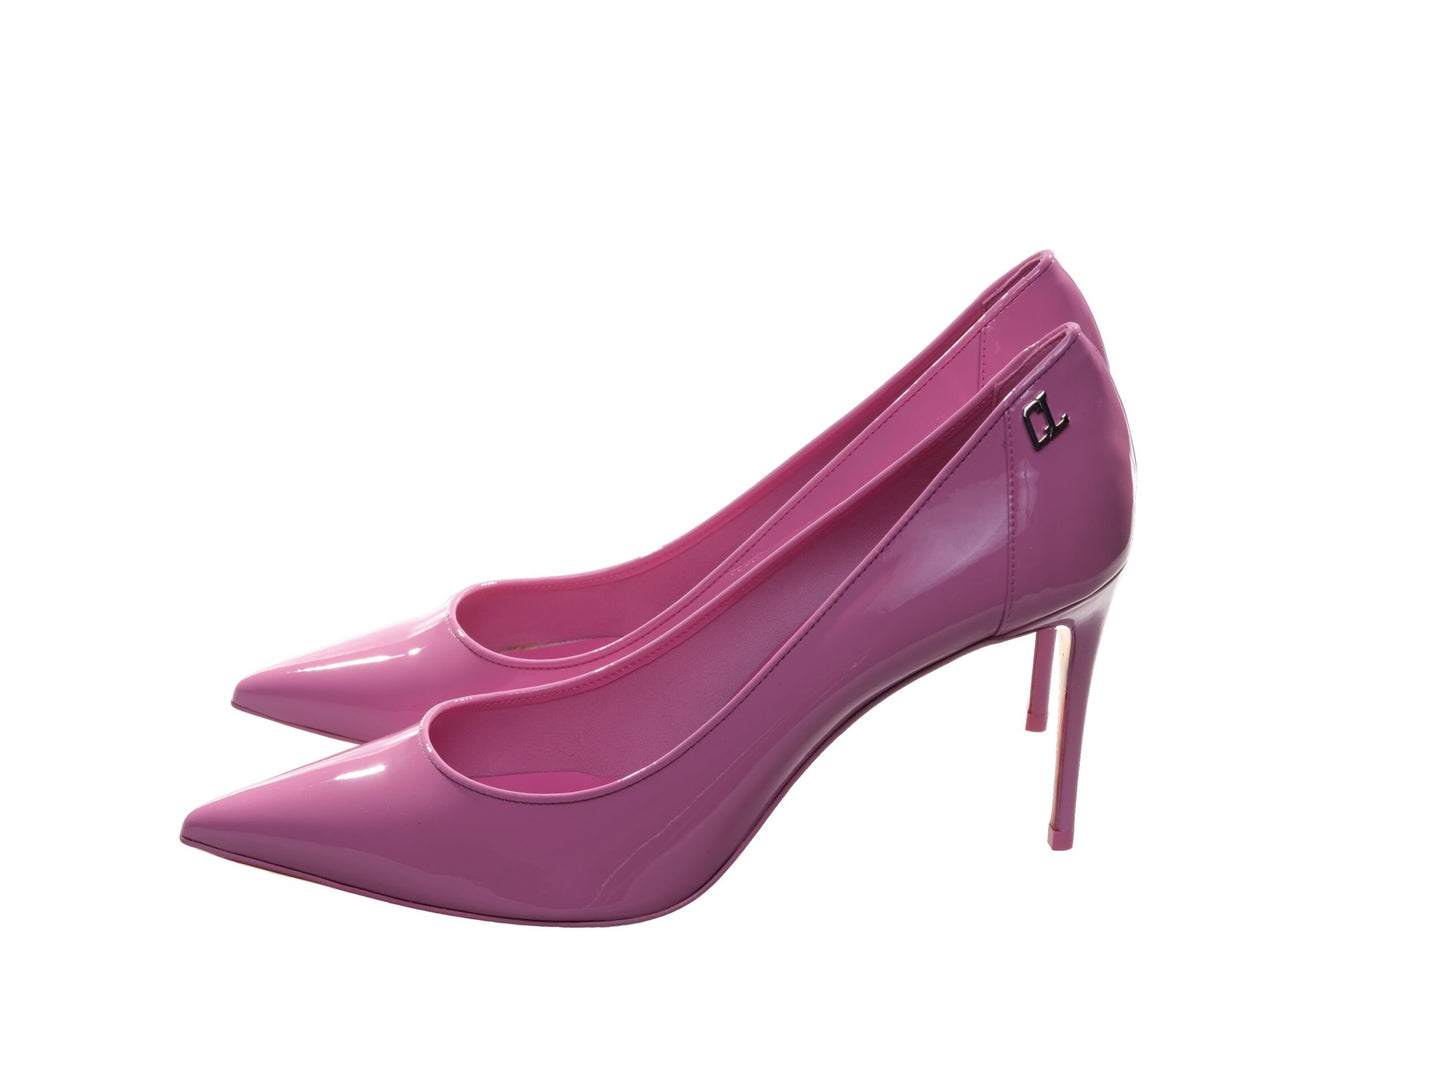 Christian Louboutin Sporty Kate 85 Pink Patent Leather High Heels